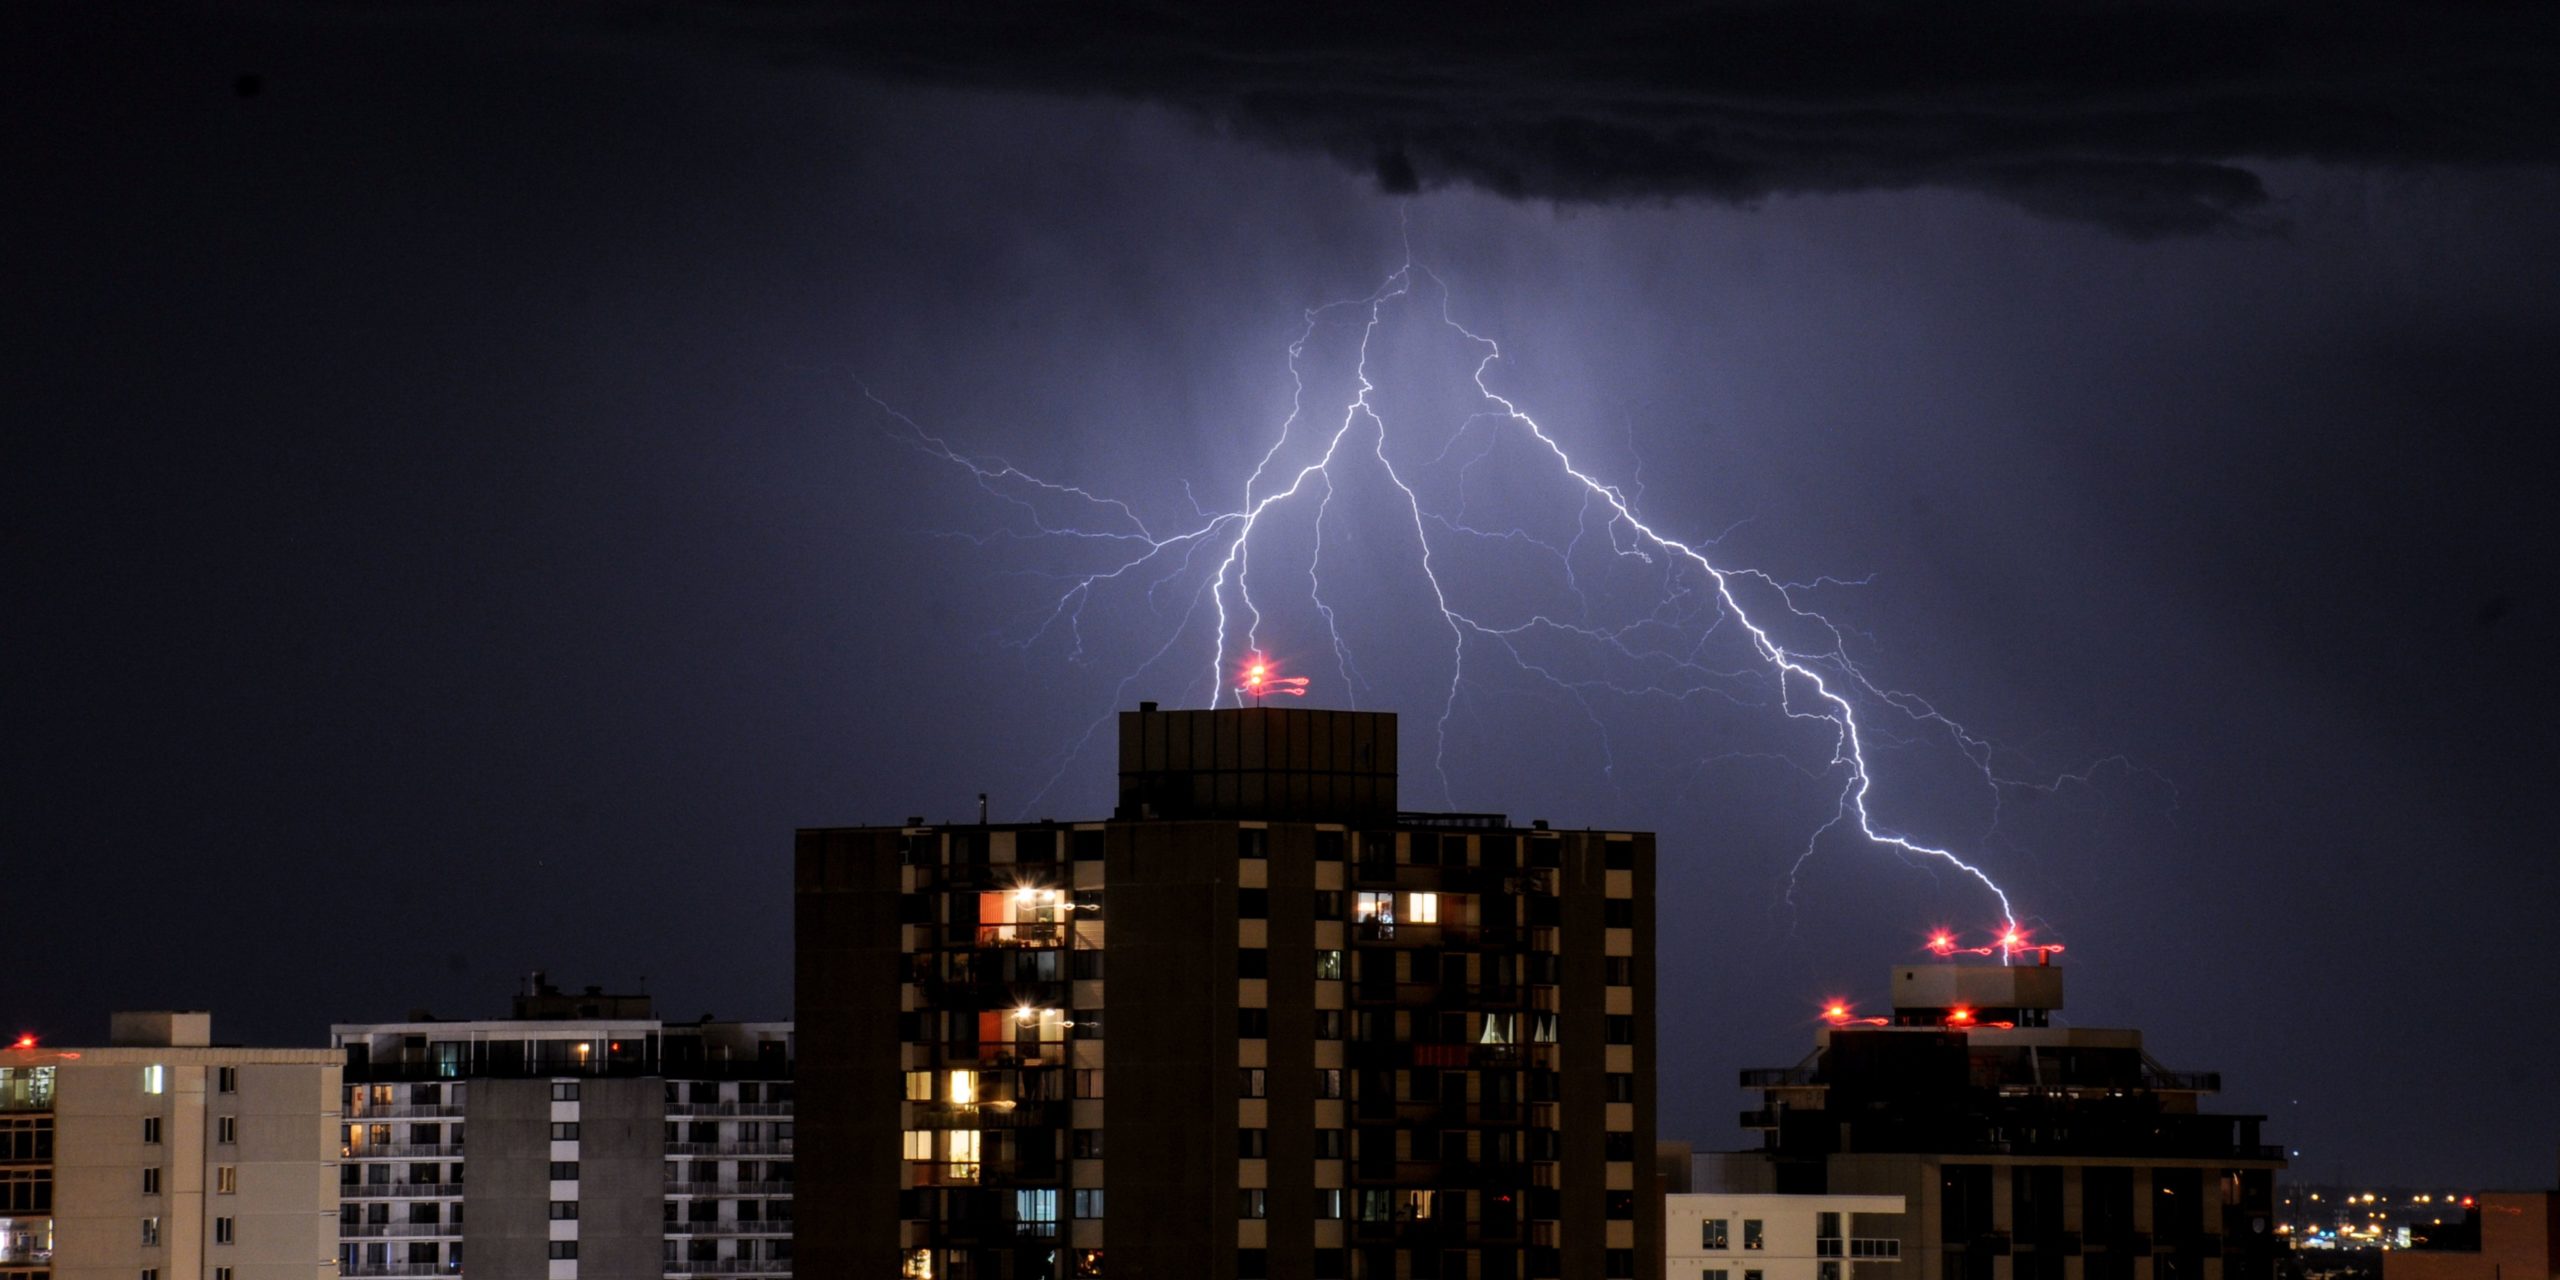 A lightning stroke in the night sky on high-rise buildings.